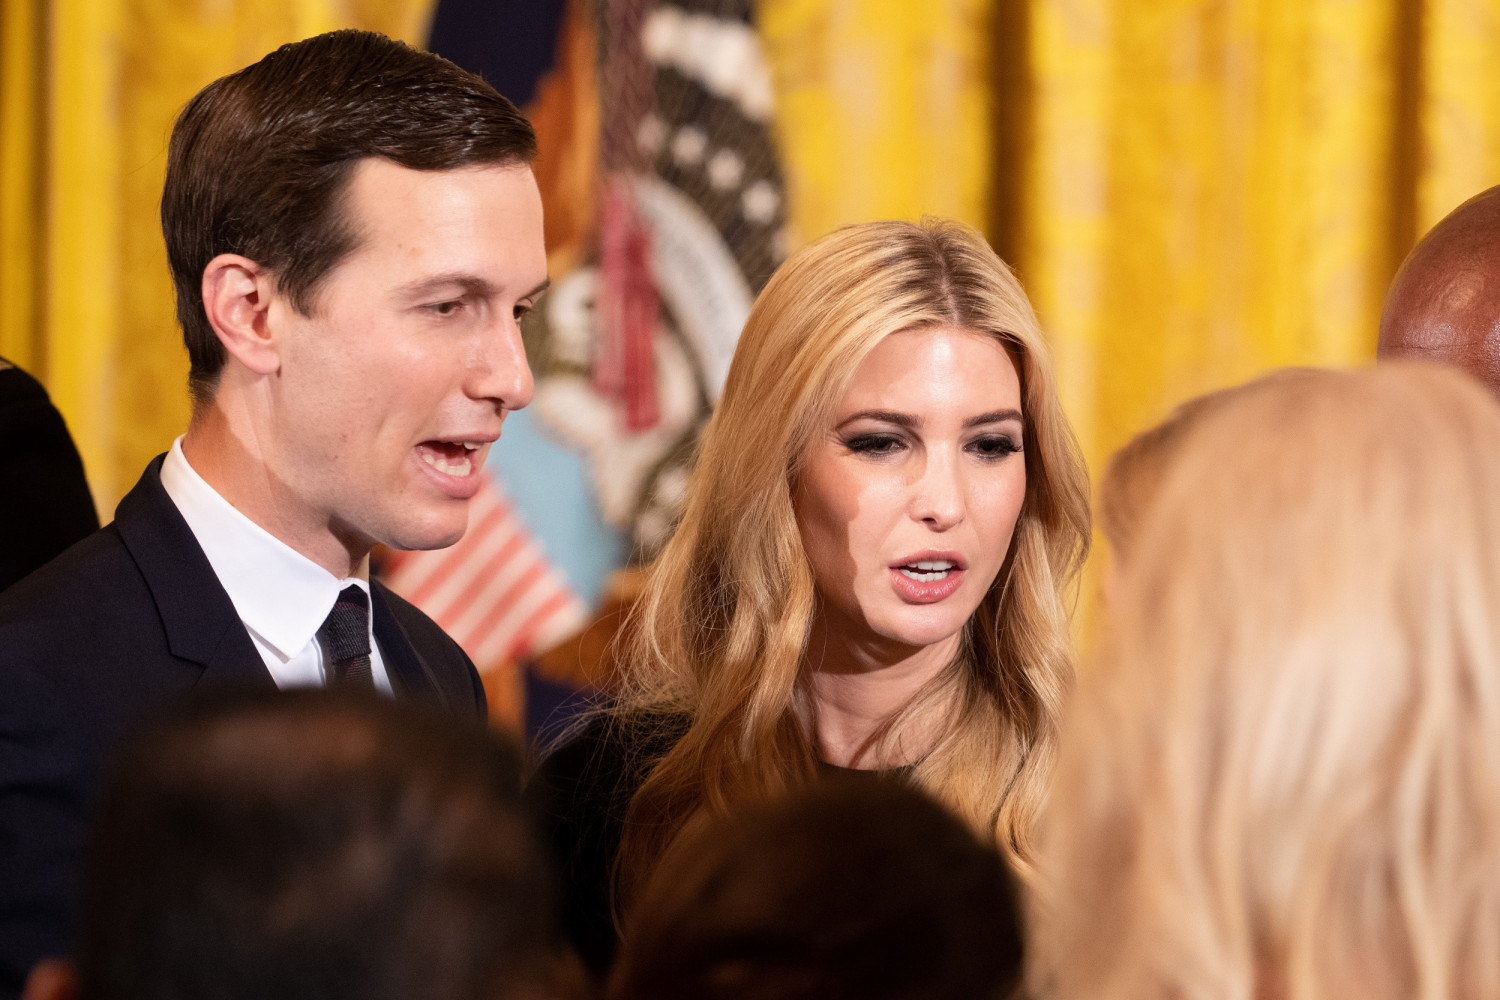 Jared Kushner, Trump’s Son-in-Law, Says Media Was Obsessed With Russia Collusion ‘Conspiracy Theory’